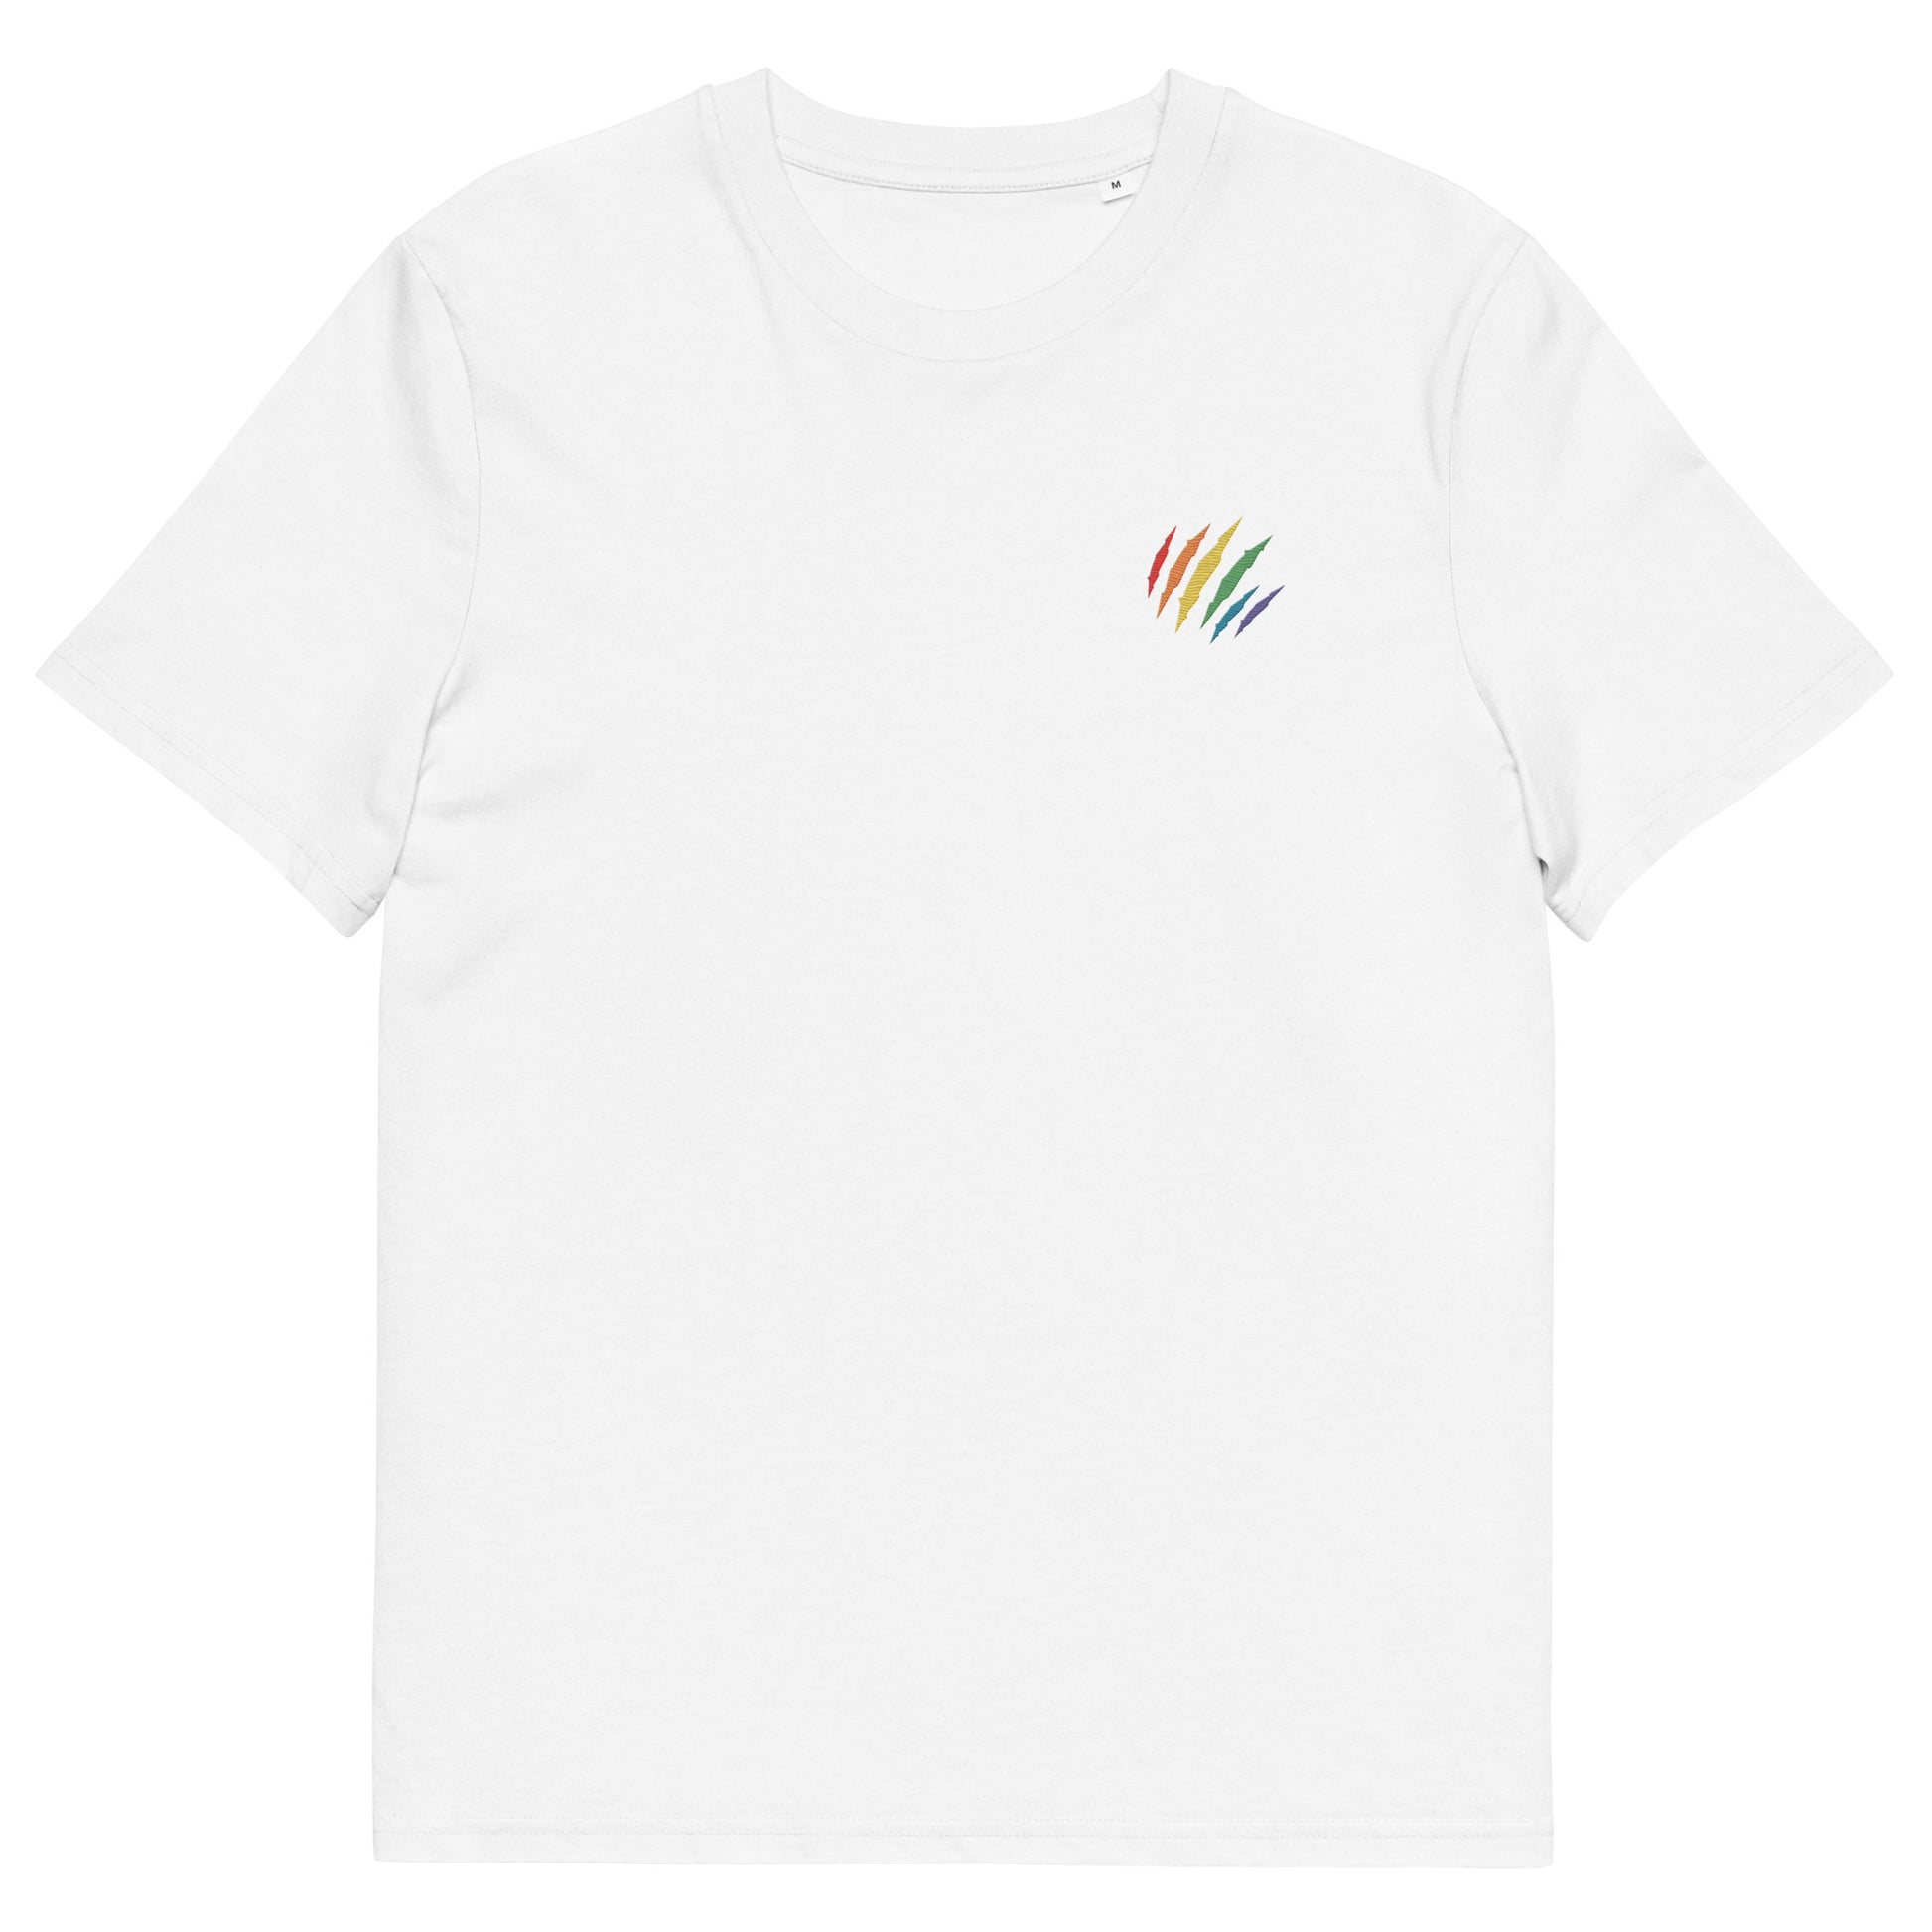 Fitted white organic cotton t-shirt with an embroidered scratch in the rainbow colors on the left chest. Available in sizes S to 3XL.